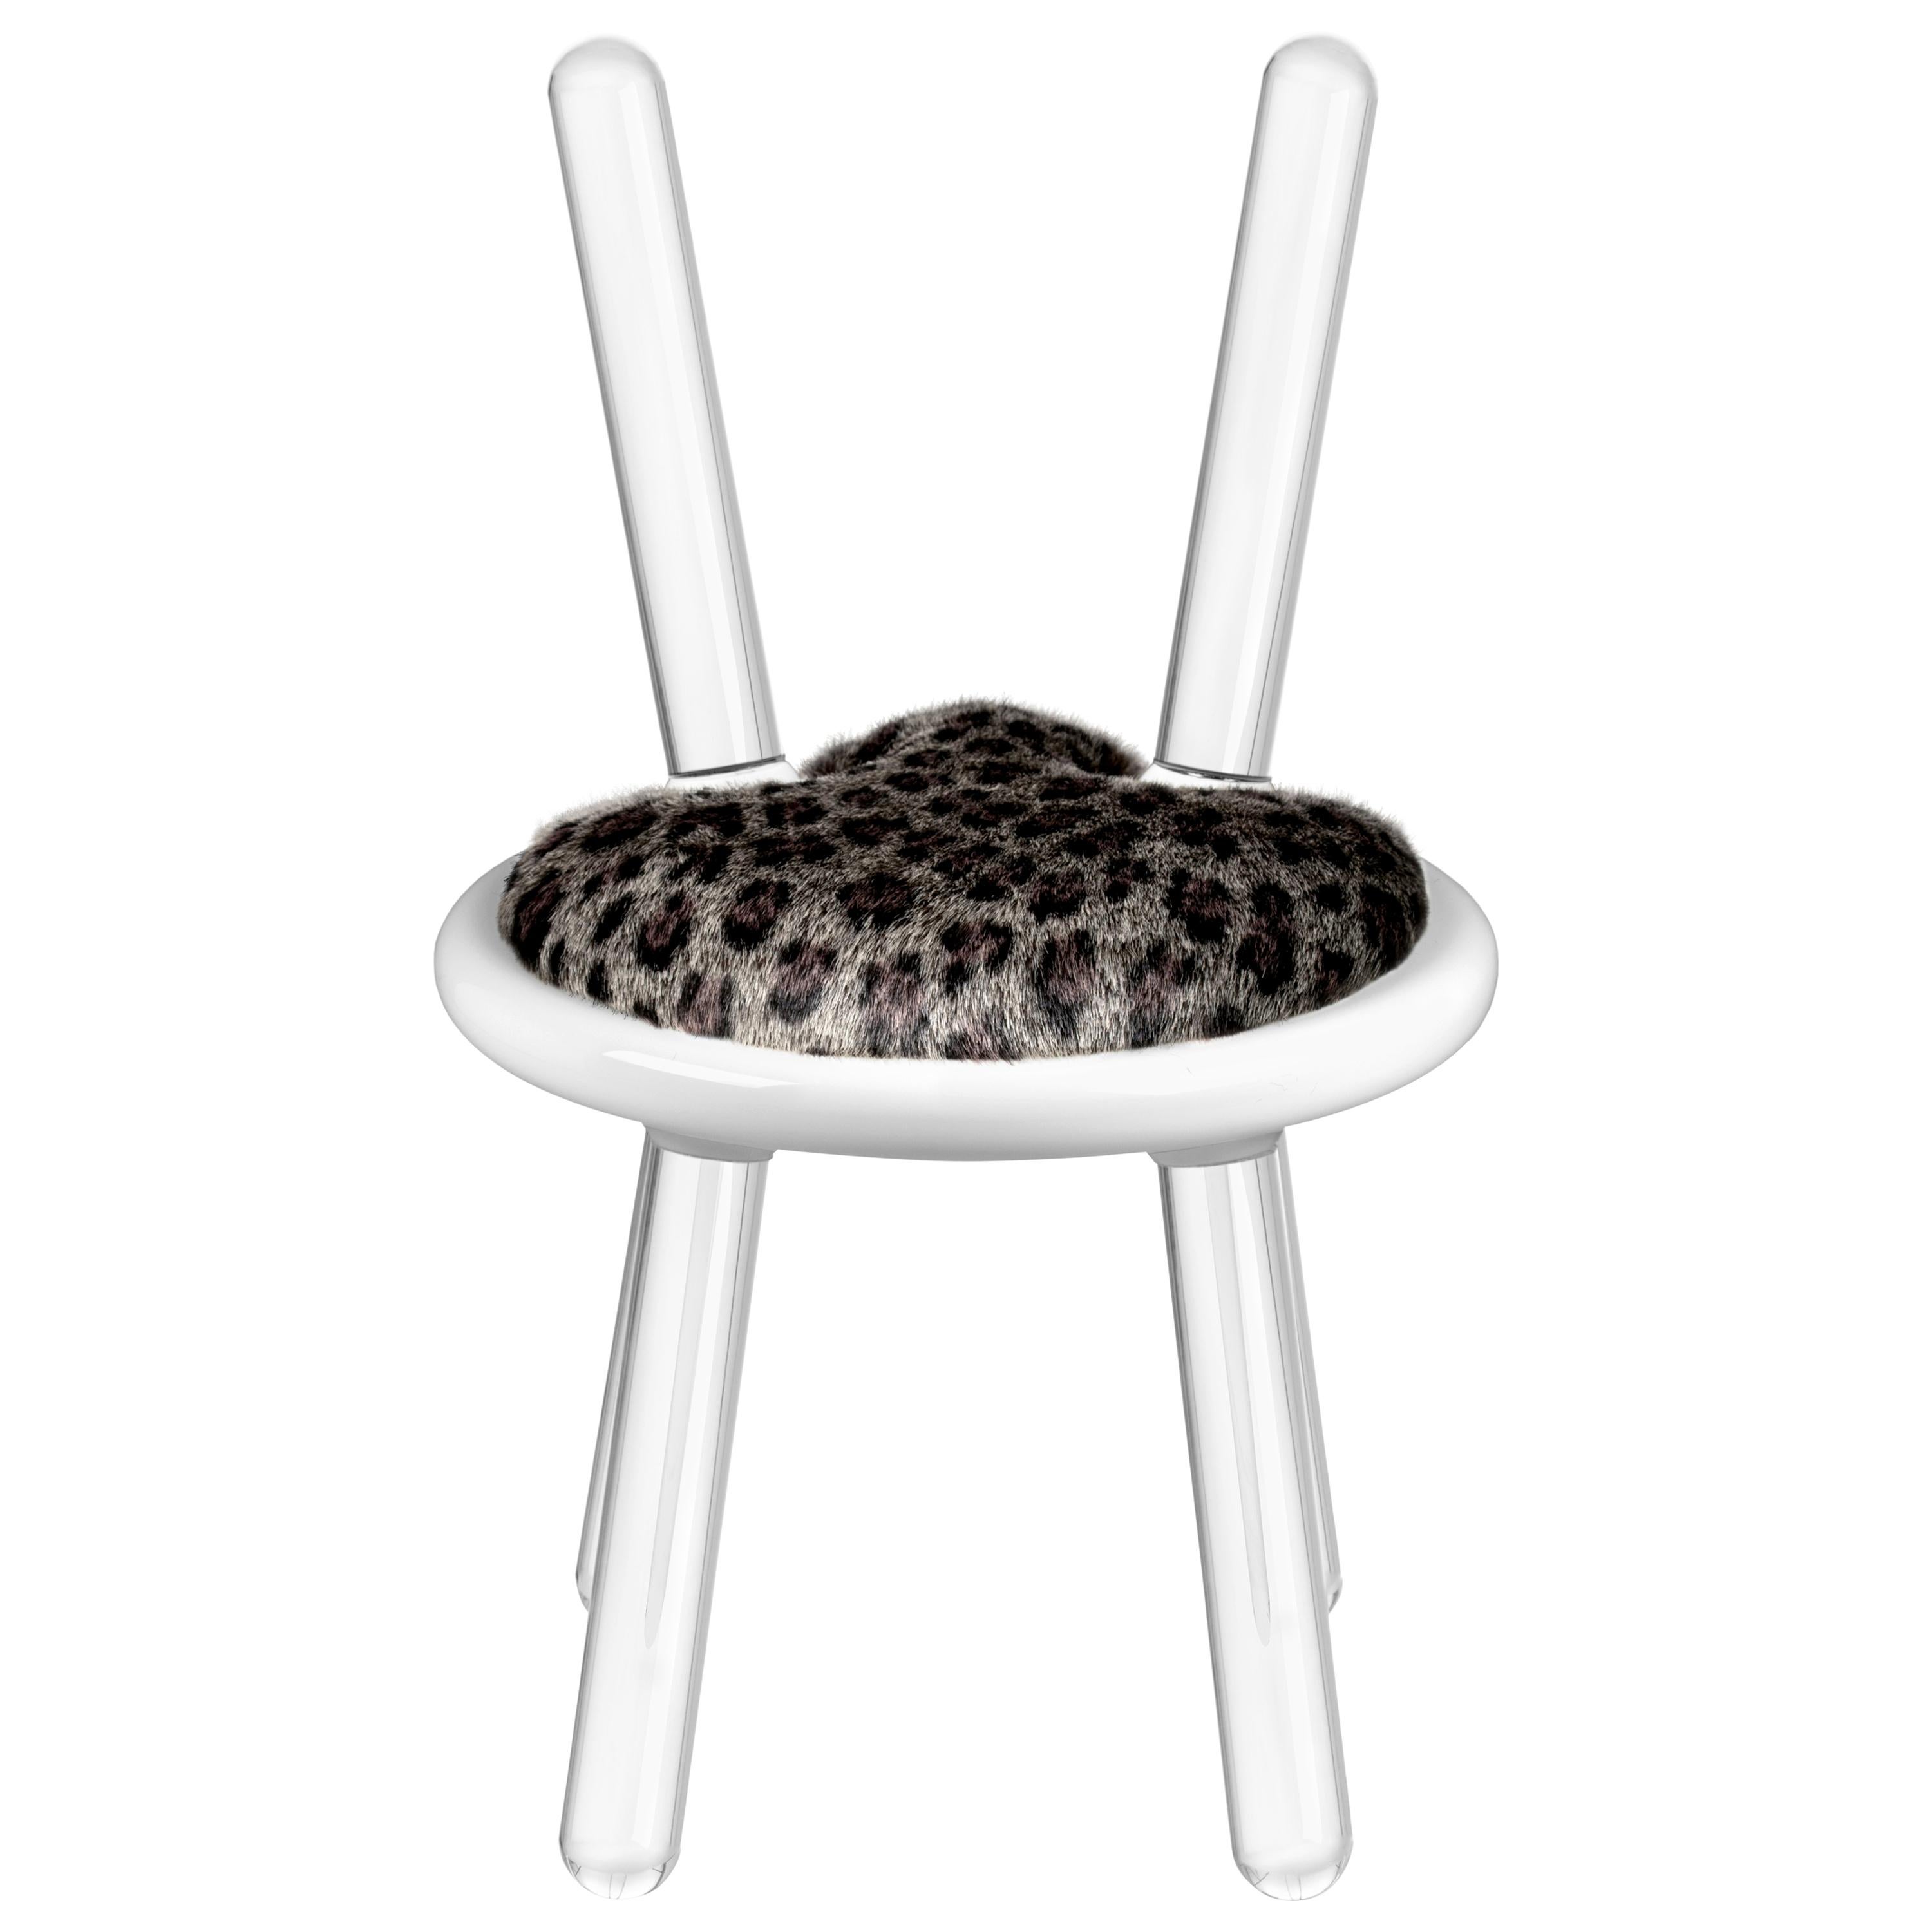 Illusion Leopard Kids Chair in Acrylic with Fur Seat by Circu Magical Furniture

Illusion Leopard Kids Chair in Acrylic with Fur Seat by Circu Magical Furniture is part of the Illusion collection that contains the most unique pieces in order to